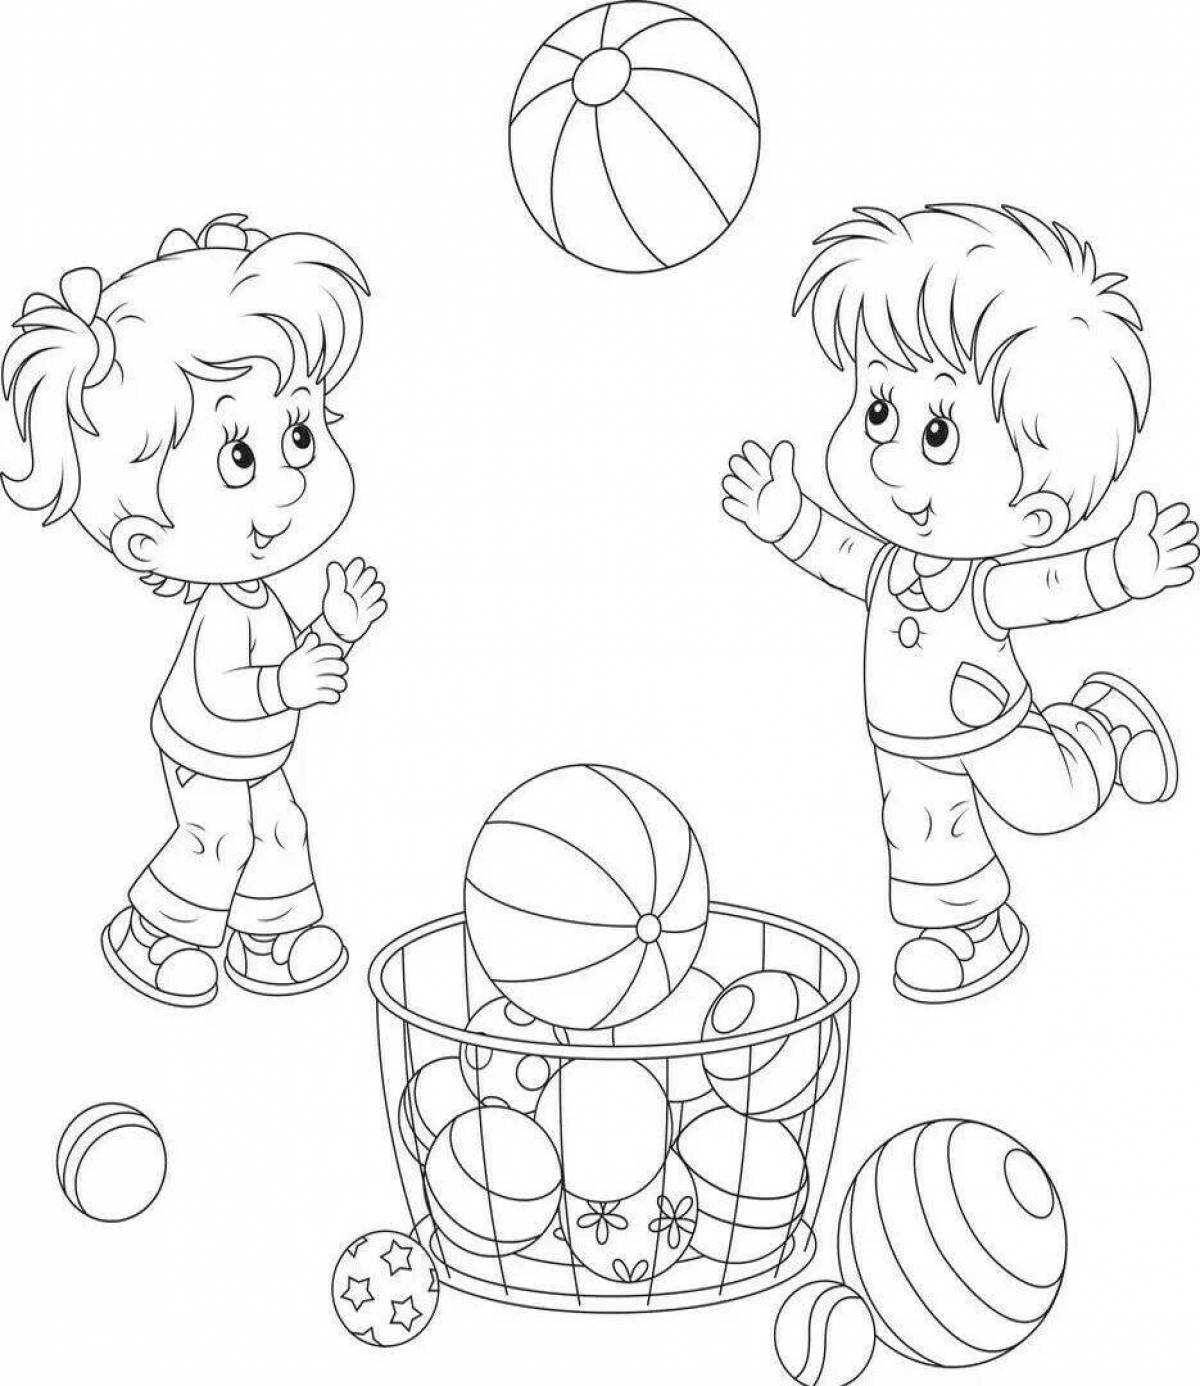 Physical and sports inspirational coloring book